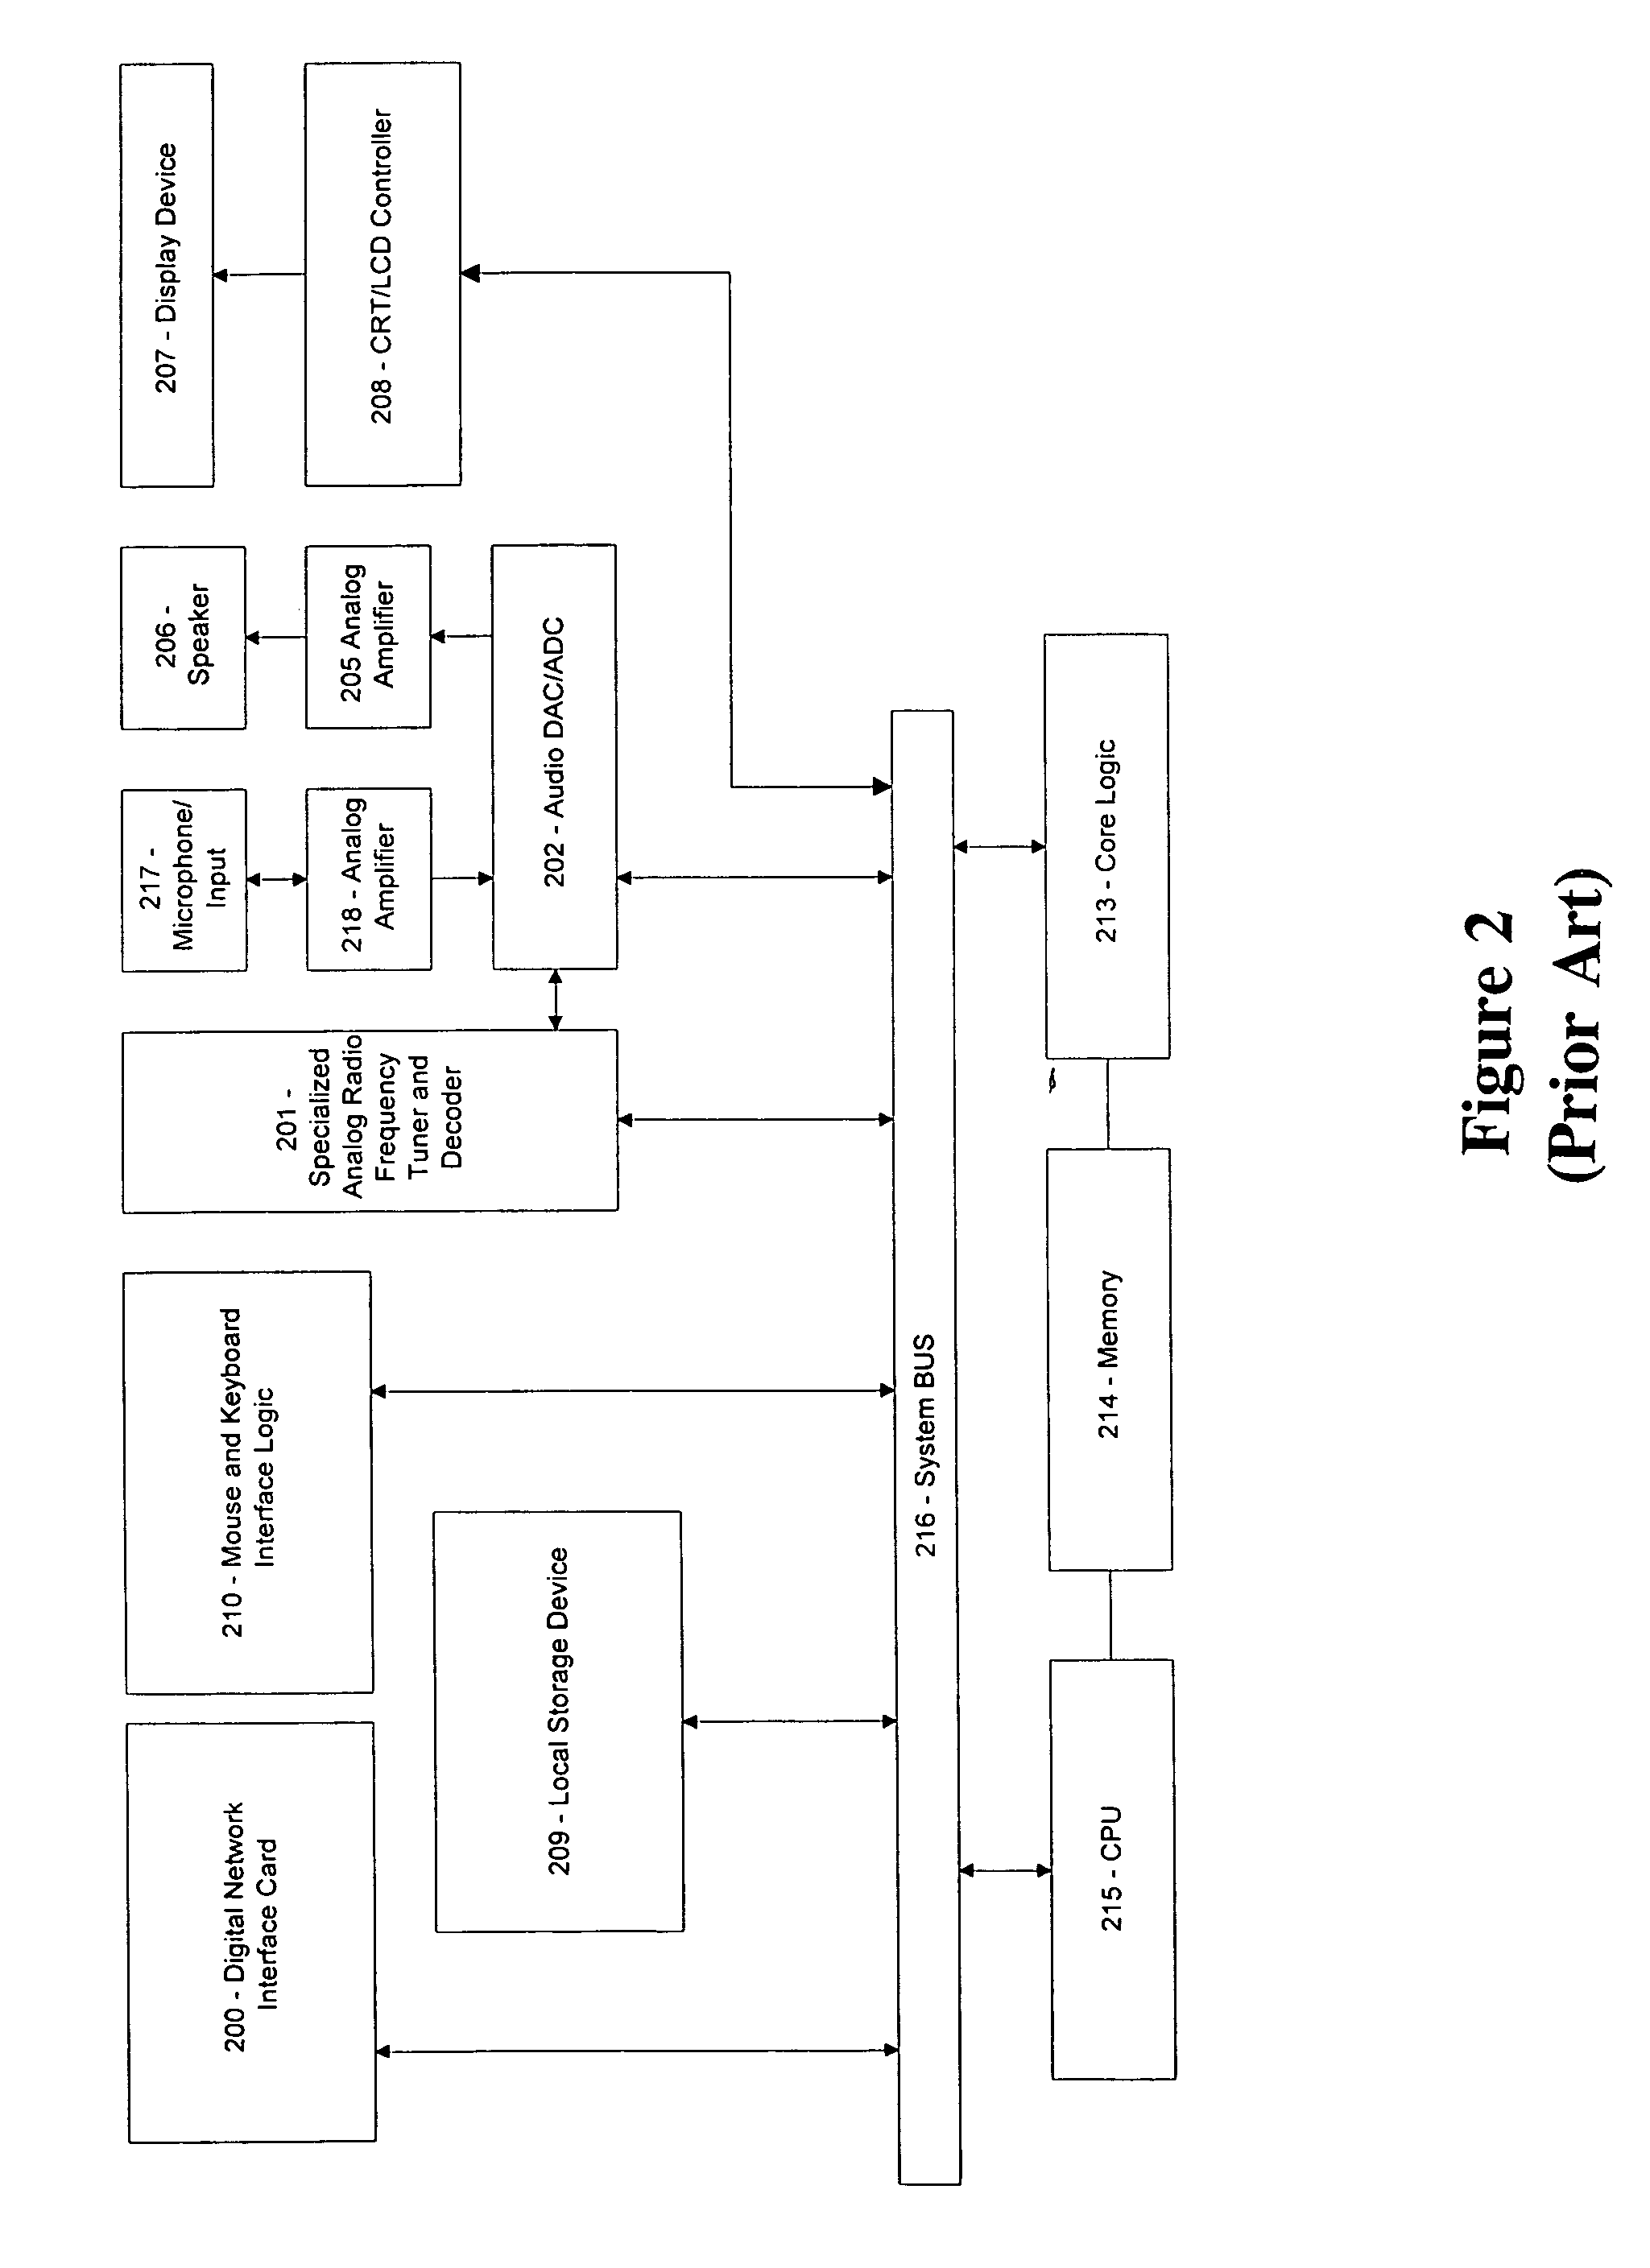 Substantially integrated digital network and broadcast radio method and apparatus